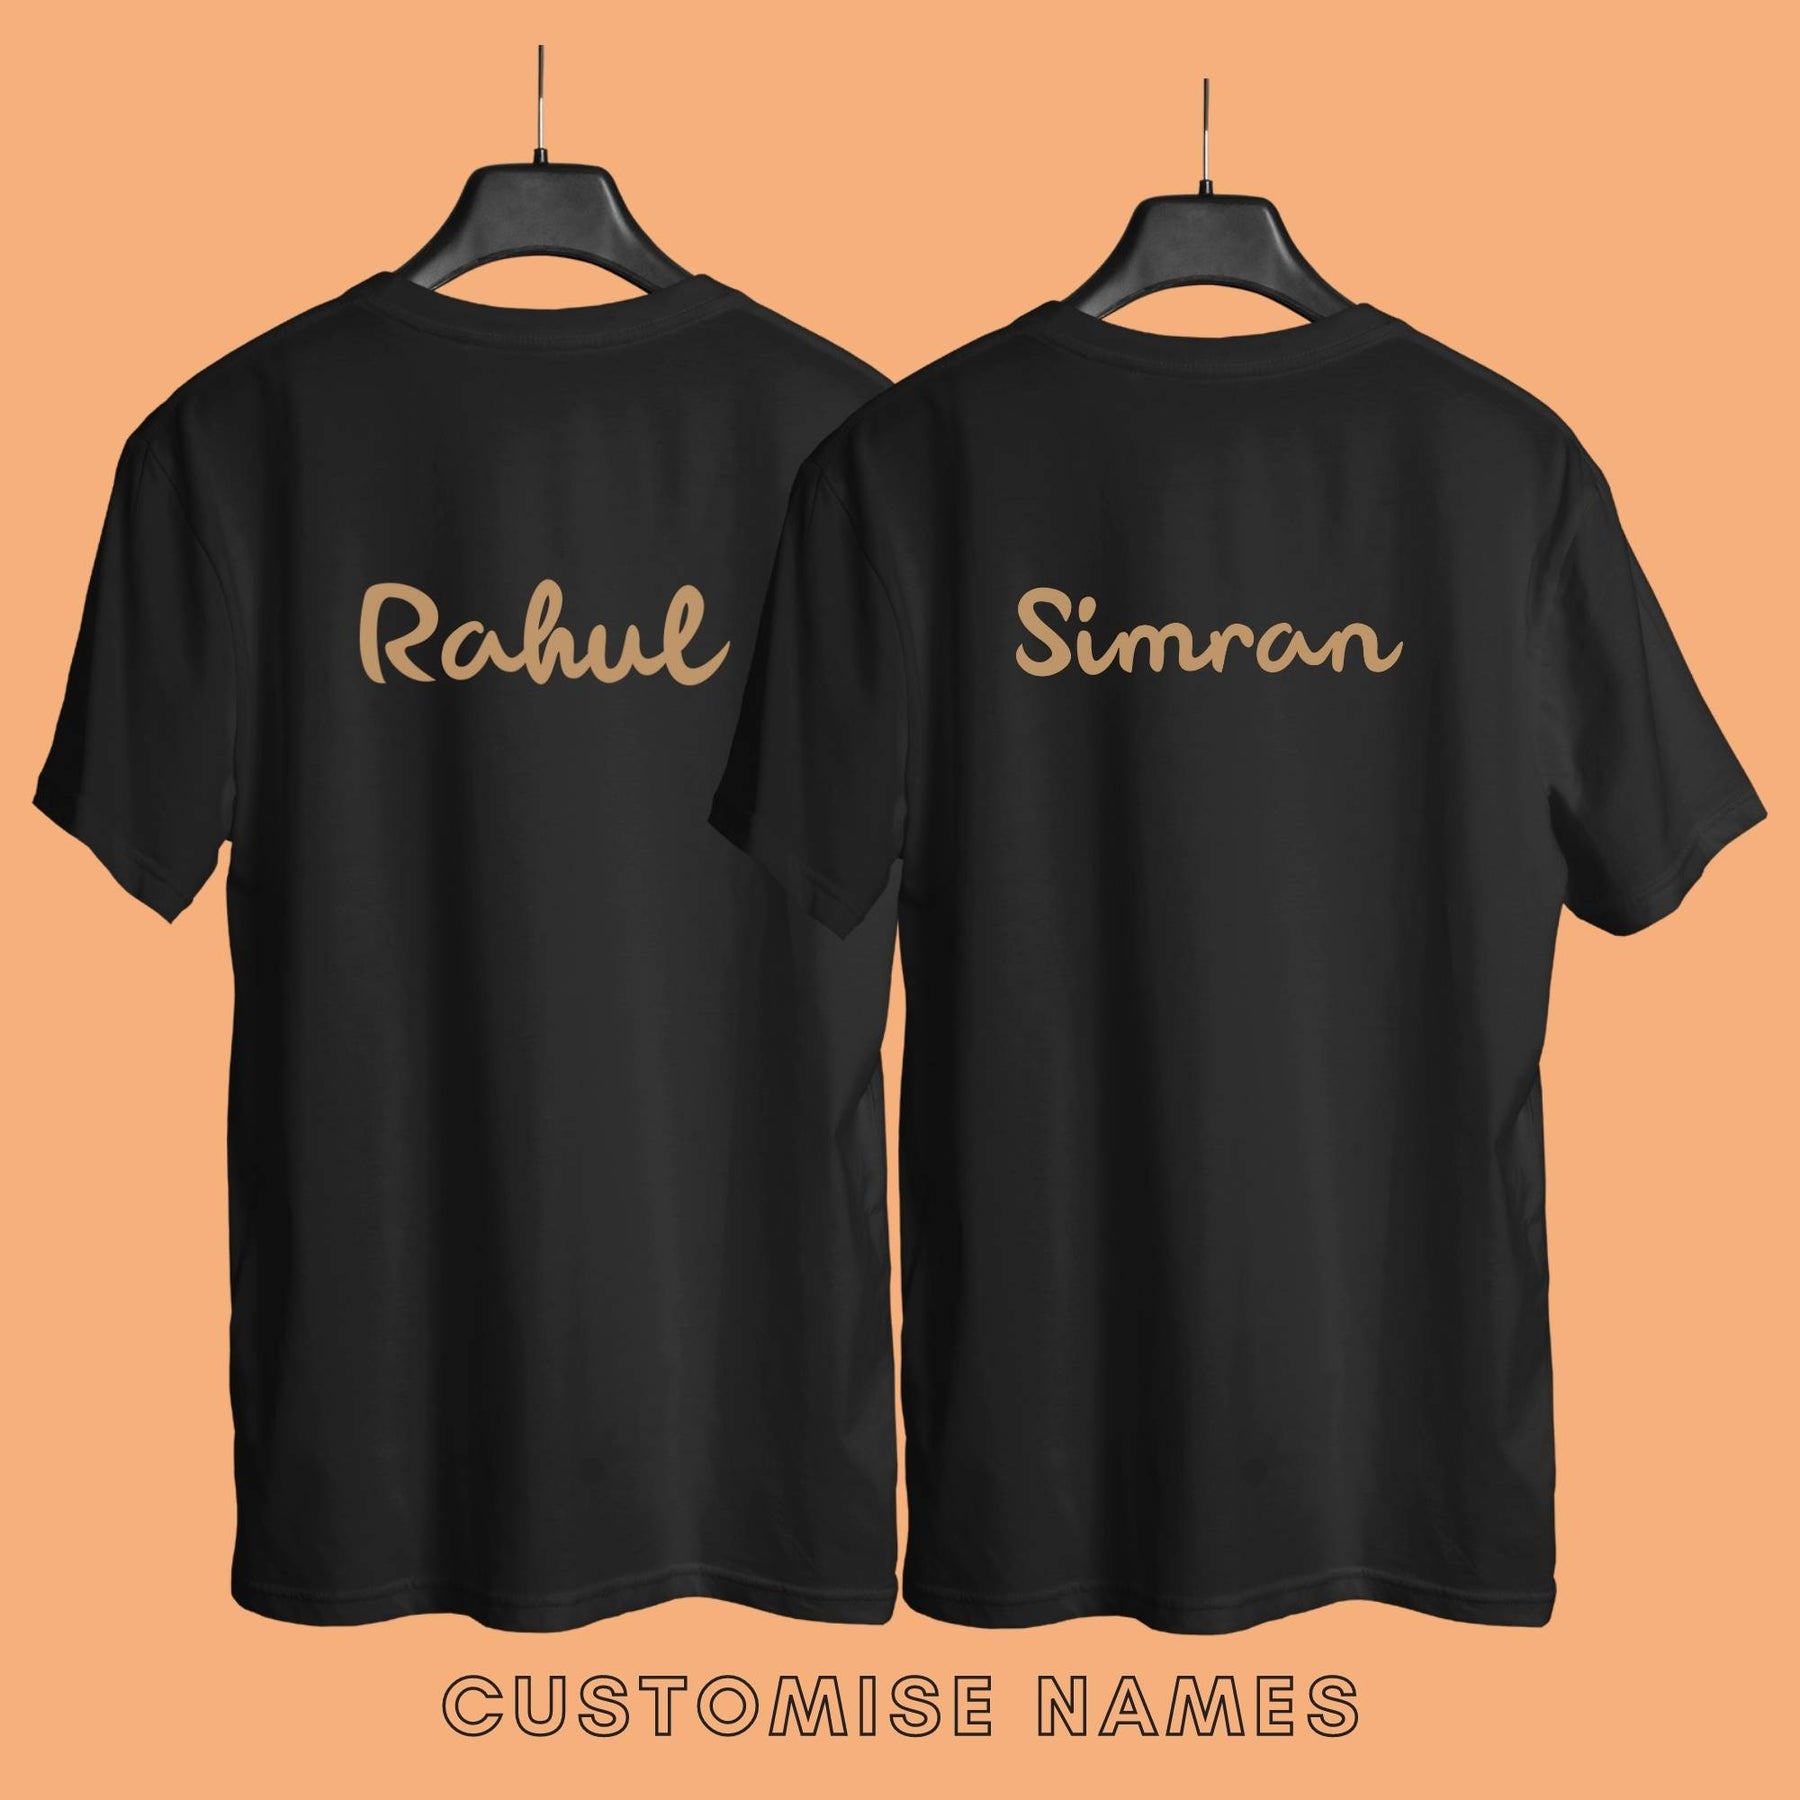 q-for-queen-K-for-king-couple-tshirt-with-front-and-back-print-customizable-black-color-premium-quality-gogirgit-back-shot